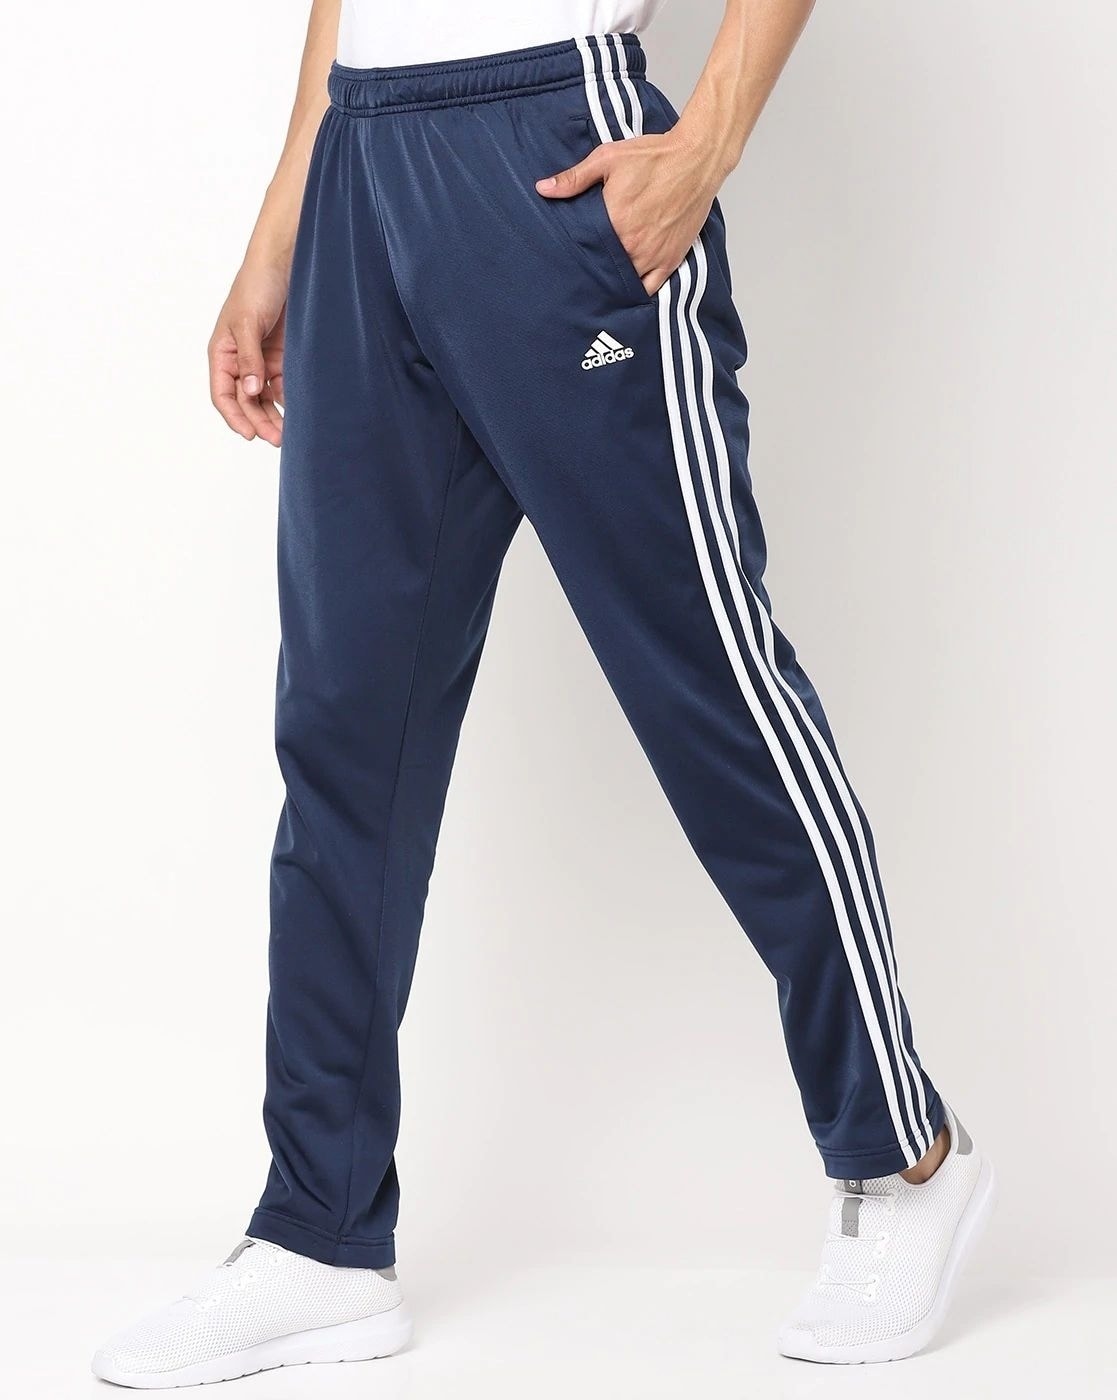 Adidas Baggy Fit Tapered Leg Cotton Lined Track Pants Size XL Unisex in  Blue Colourway - Etsy India